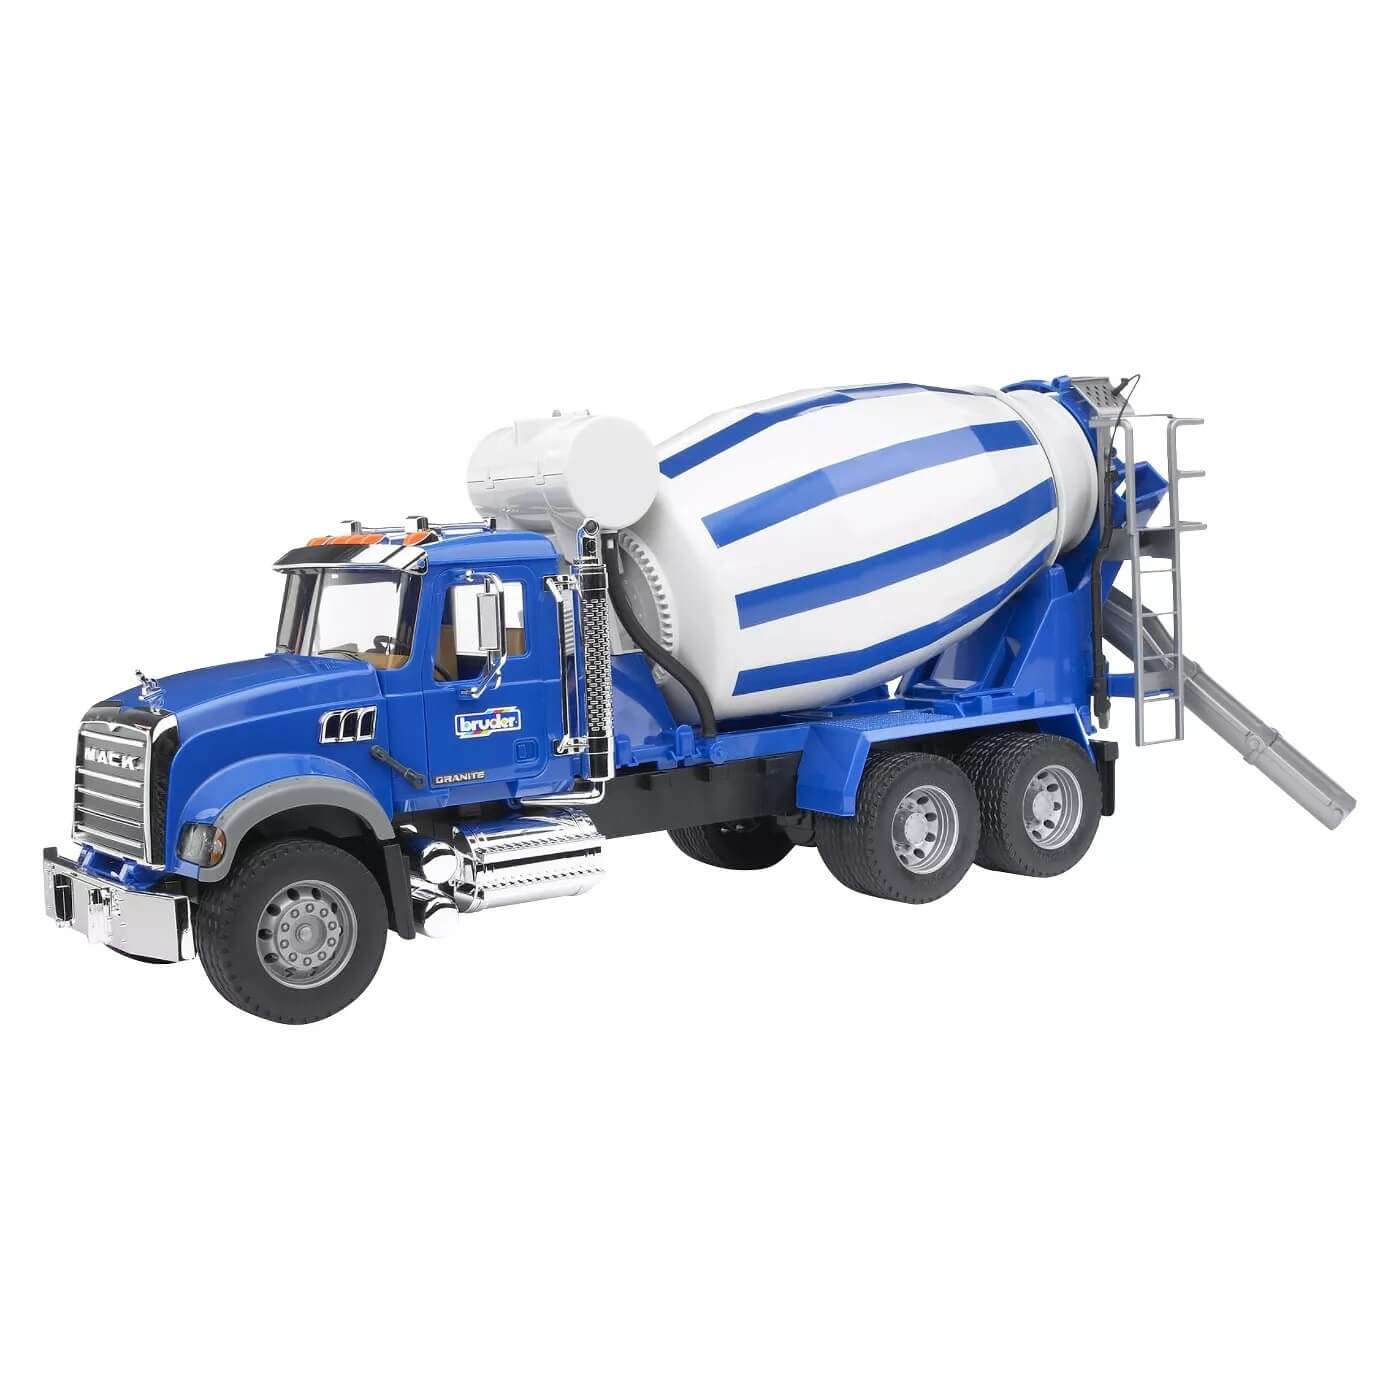 Side view of the Bruder Mack cement truck mixer in blue with a blue and white barrel.